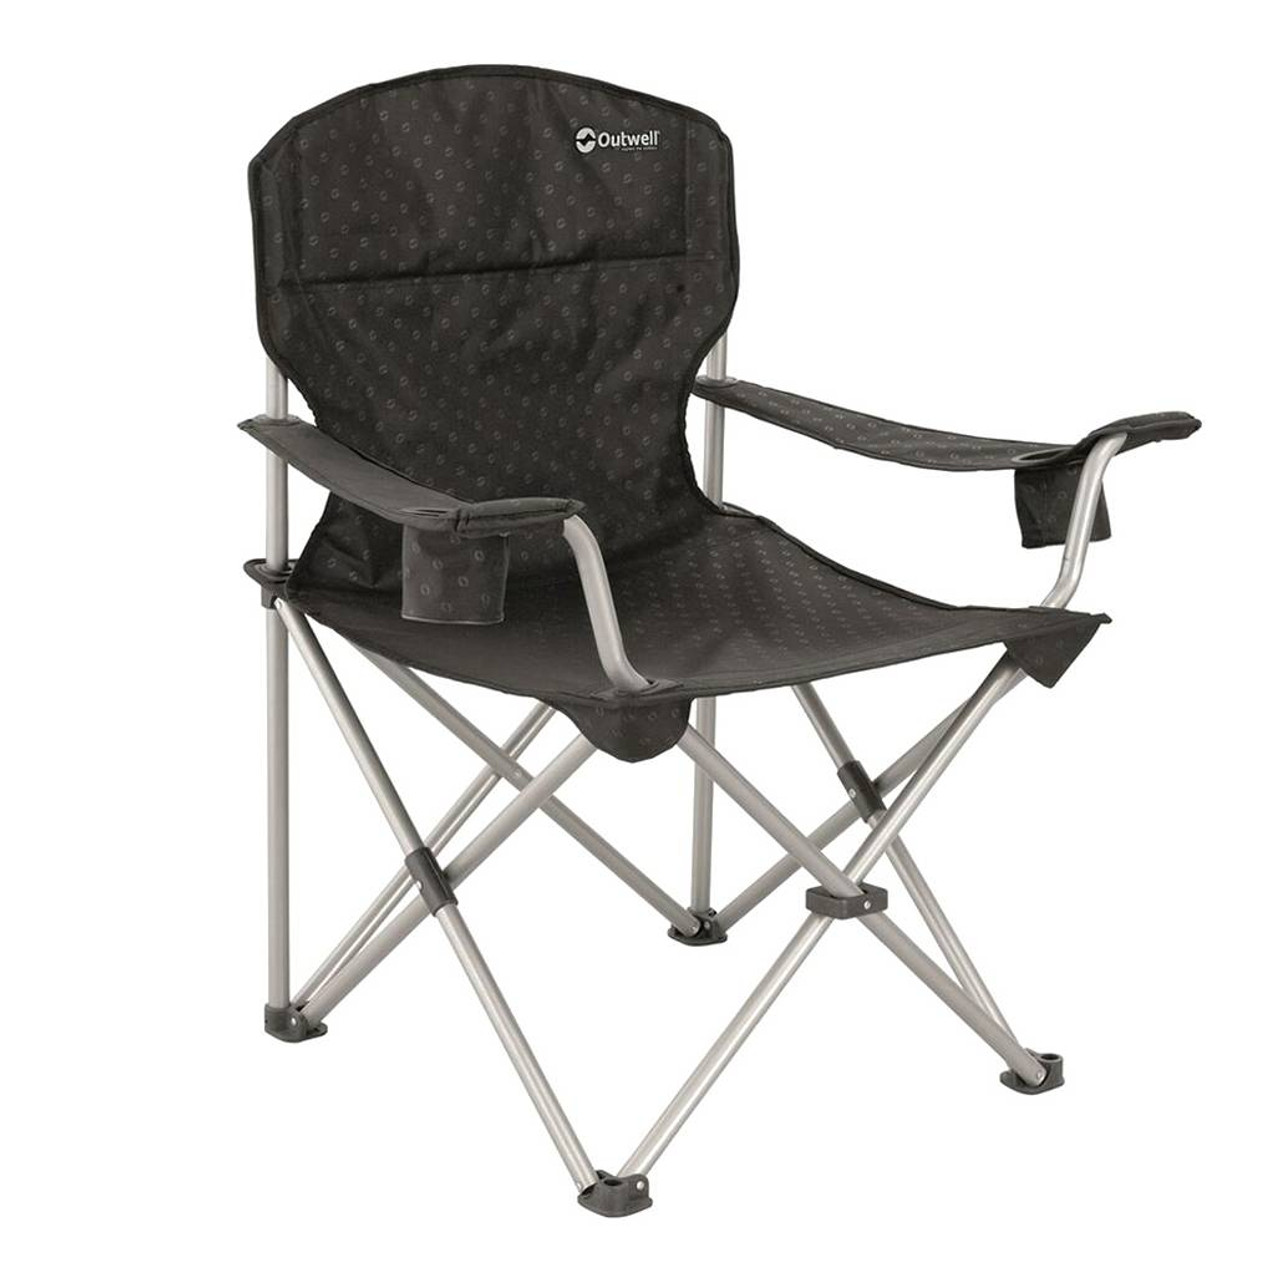 Outwell Catamarca XL Camping Chair